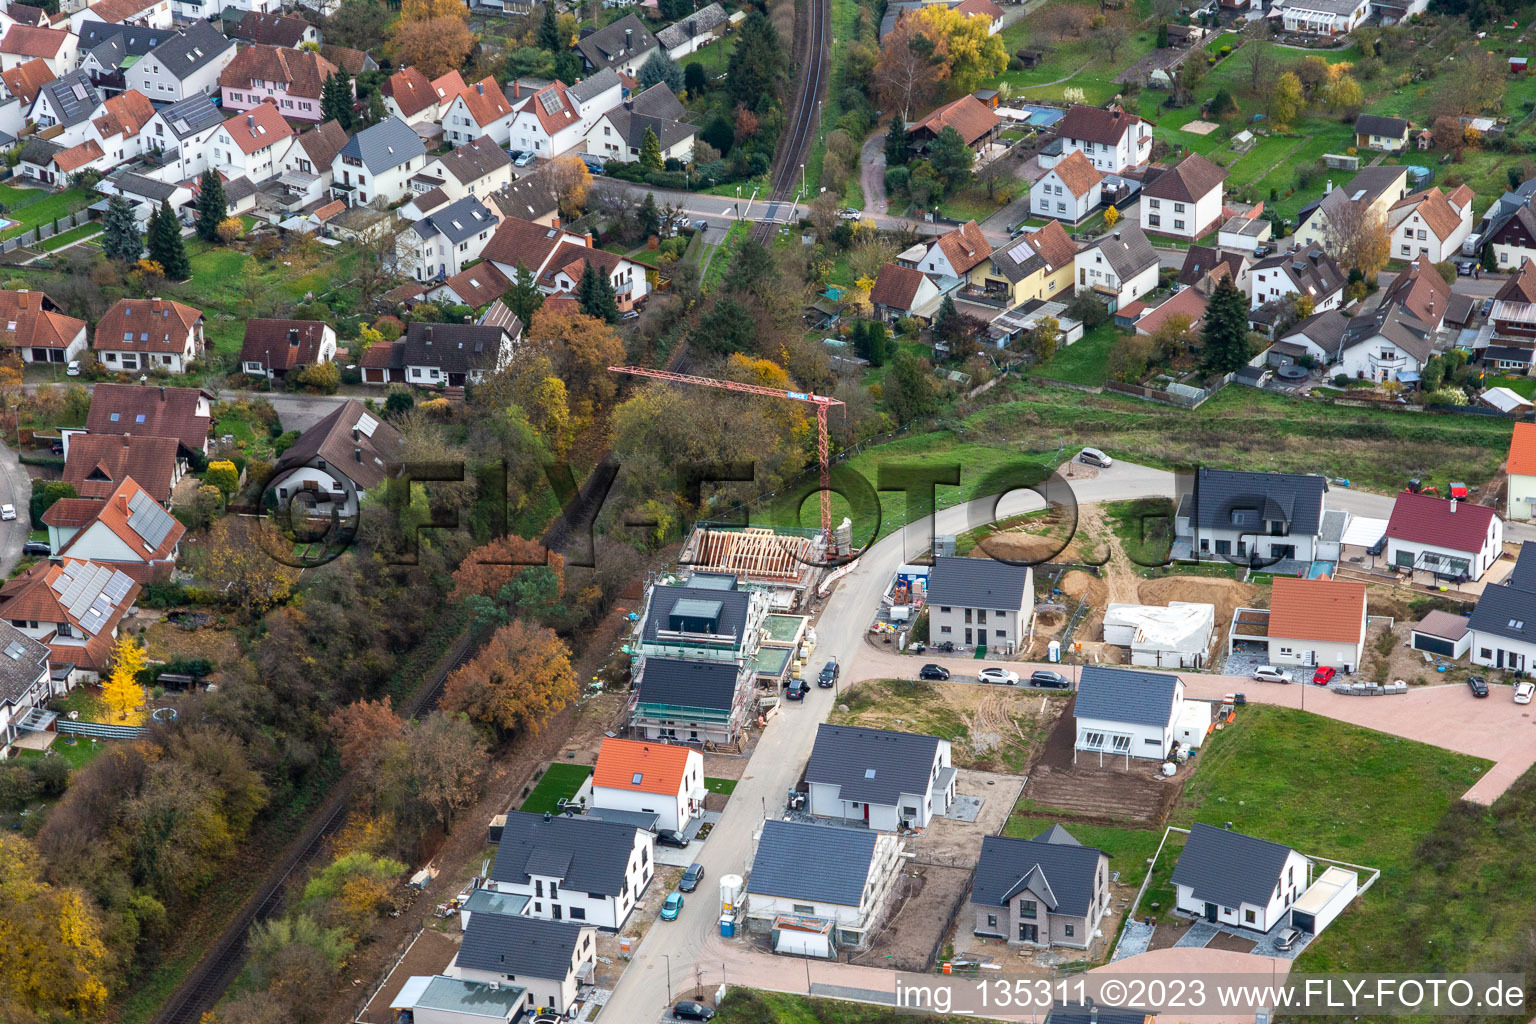 New development area K2 in Kandel in the state Rhineland-Palatinate, Germany from the plane